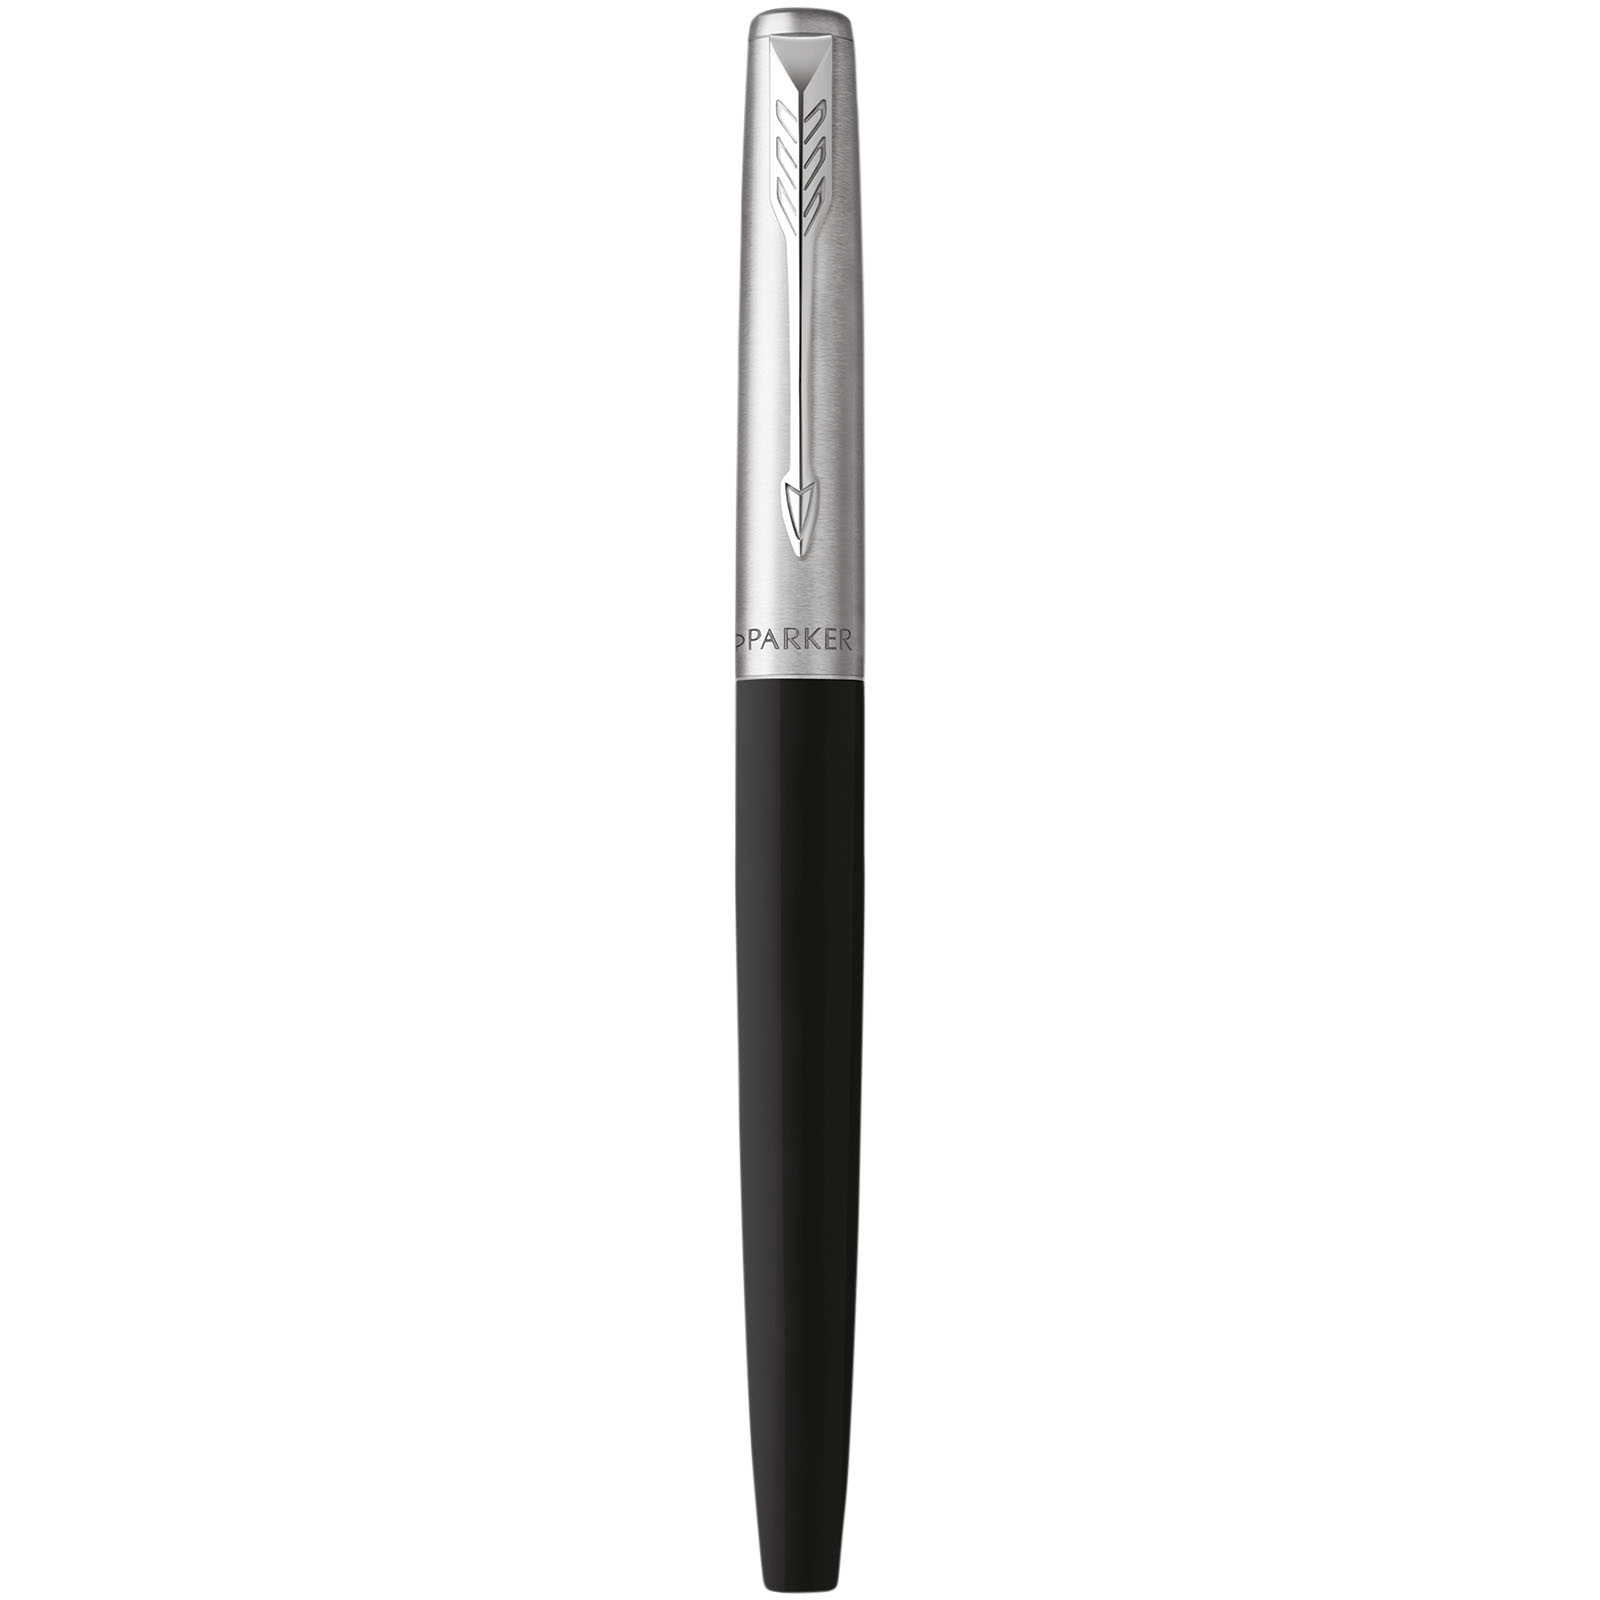 Advertising Rollerball Pens - Parker Jotter plastic with stainless steel rollerball pen - 2